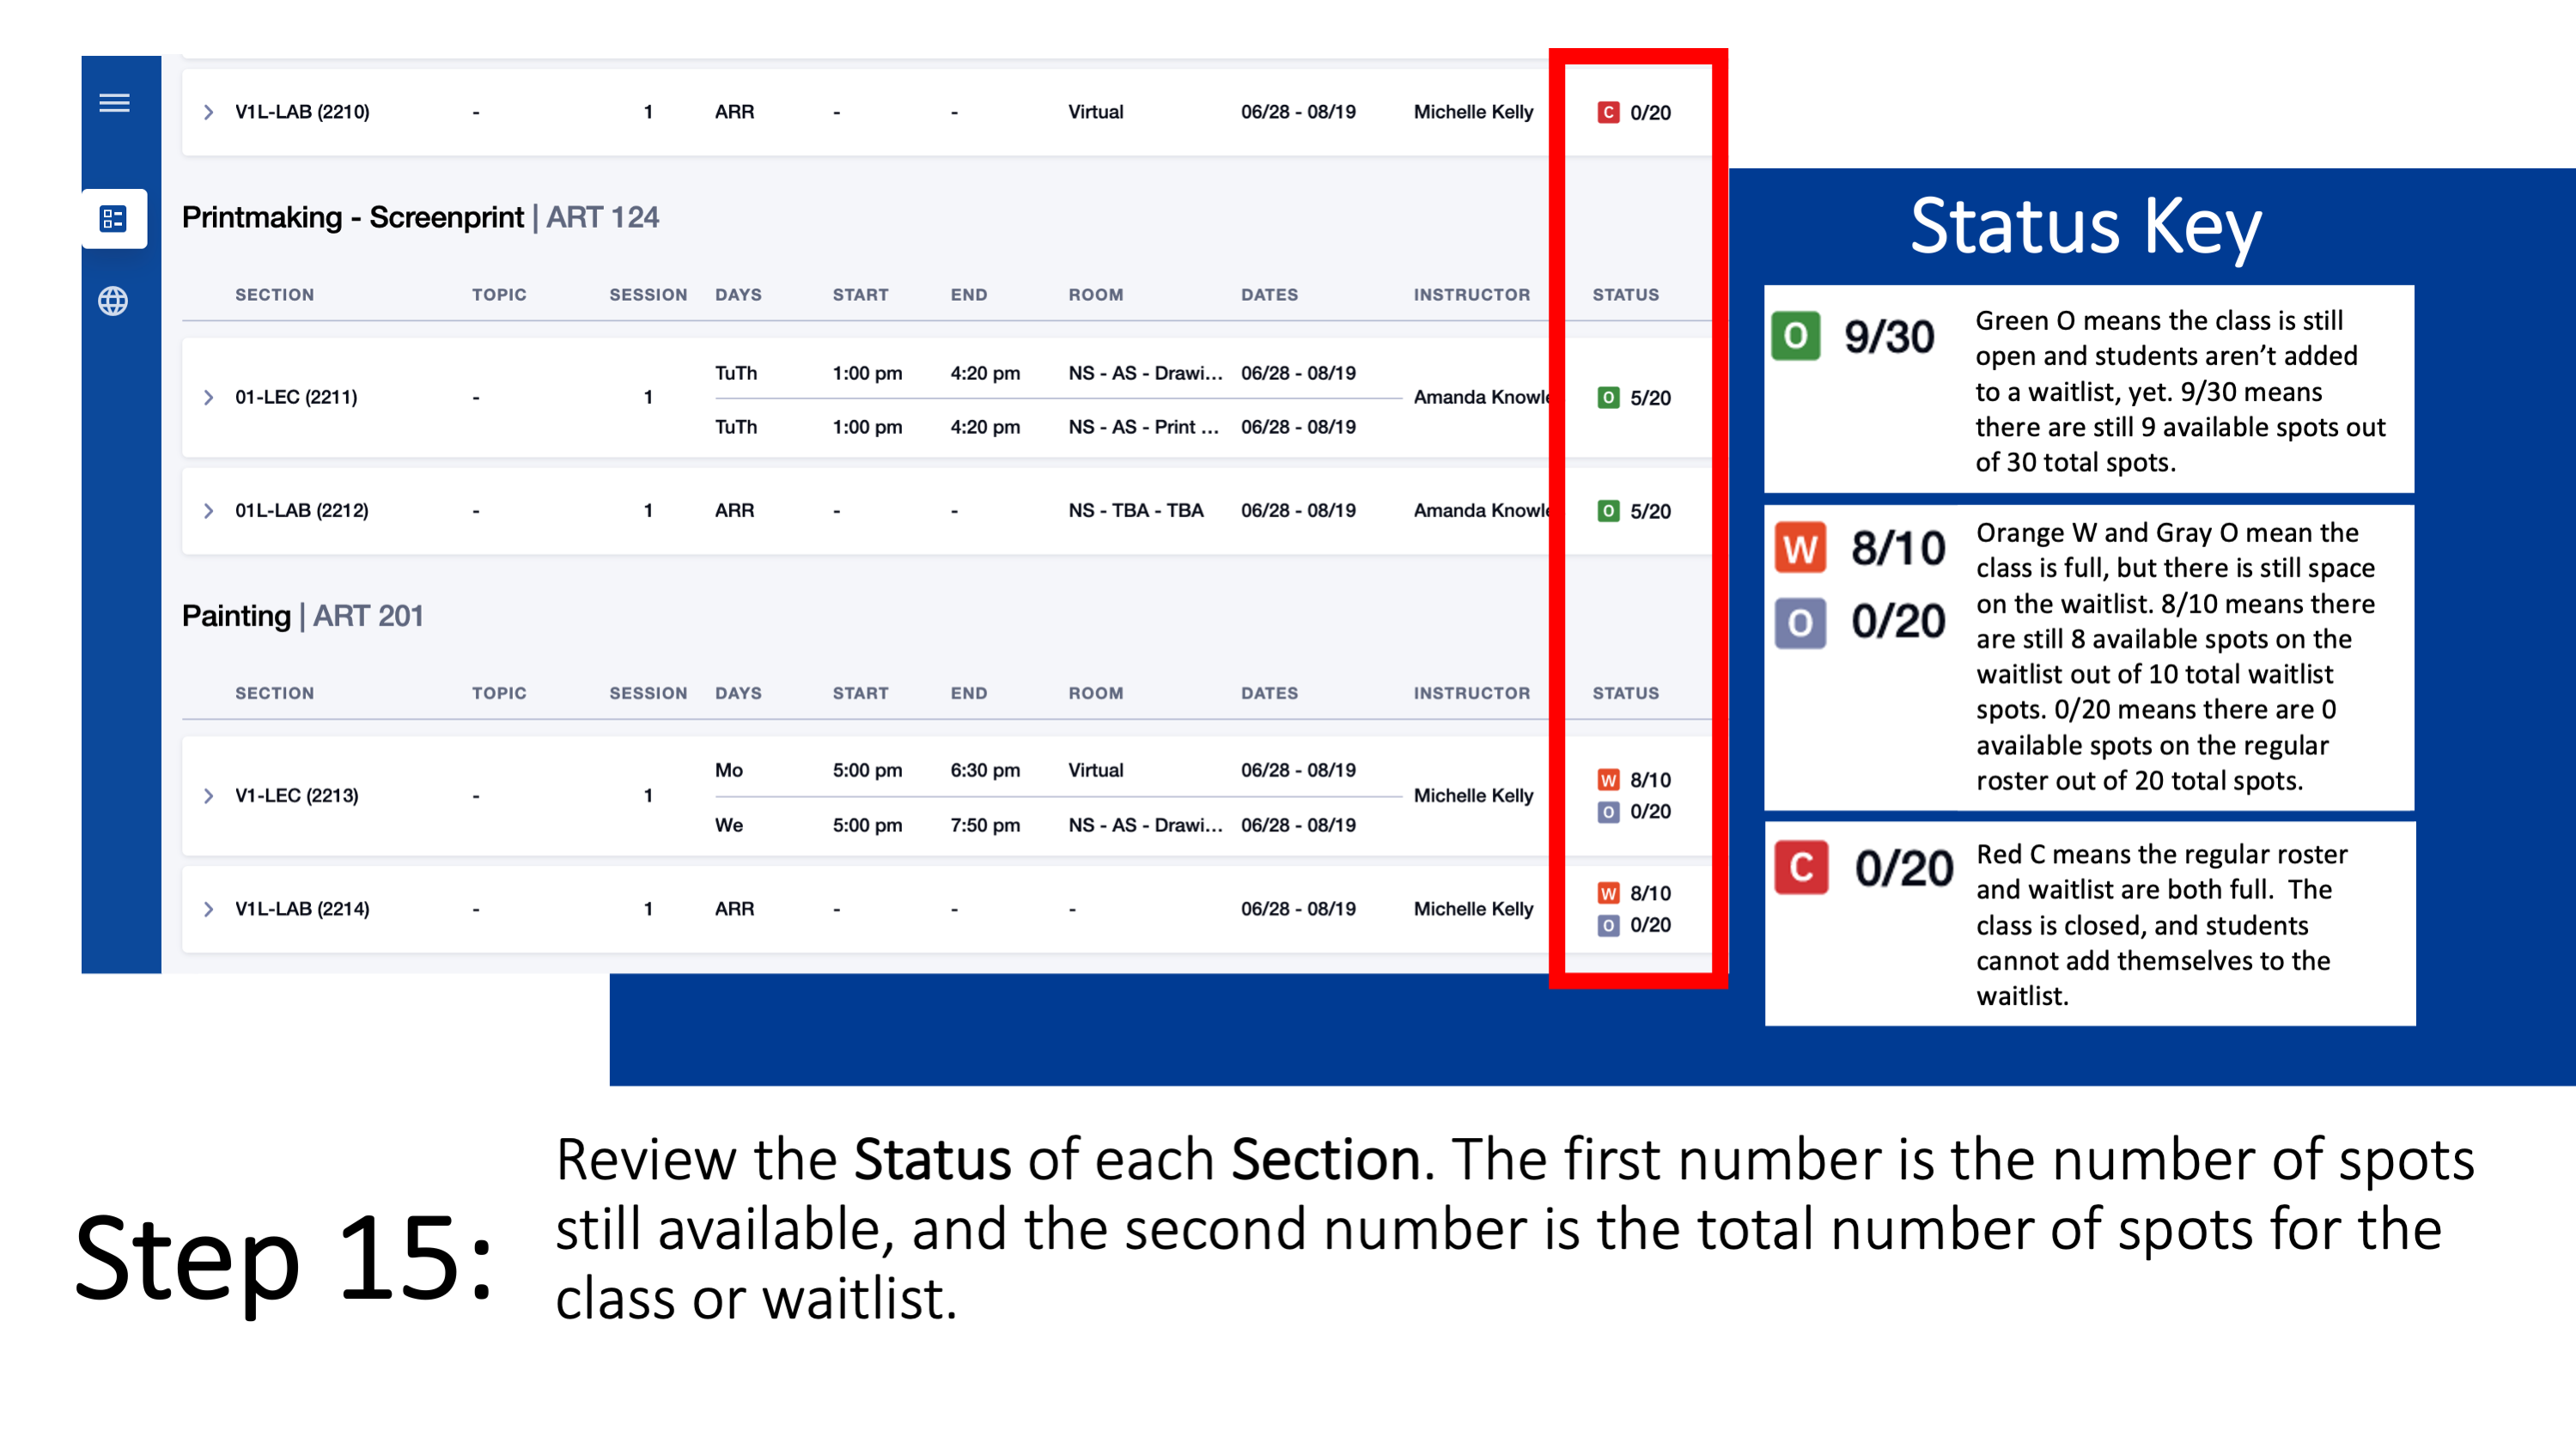 Step 15: Review the Status of each Section. The first number is the number of spots still available, and the second number is the total number of spots for the class or waitlist. Status Key: Green O means the class is still open and students aren’t added to a waitlist, yet. 9/30 means there are still 9 available spots out of 30 total spots; Orange W and Gray O mean the class is full, but there is still space on the waitlist